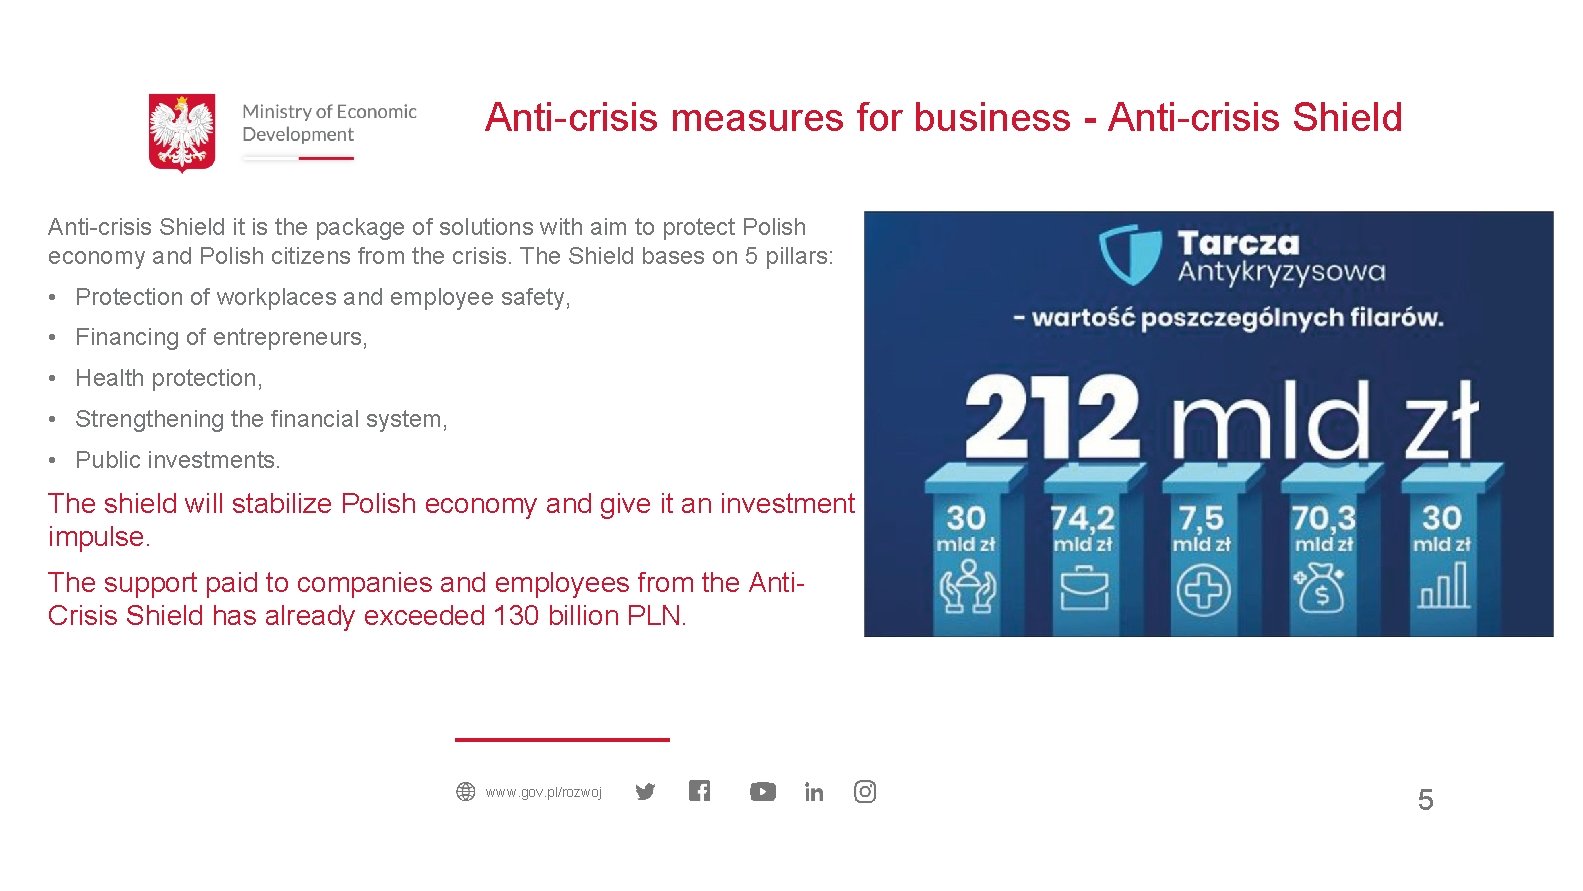 Anti-crisis measures for business - Anti-crisis Shield it is the package of solutions with